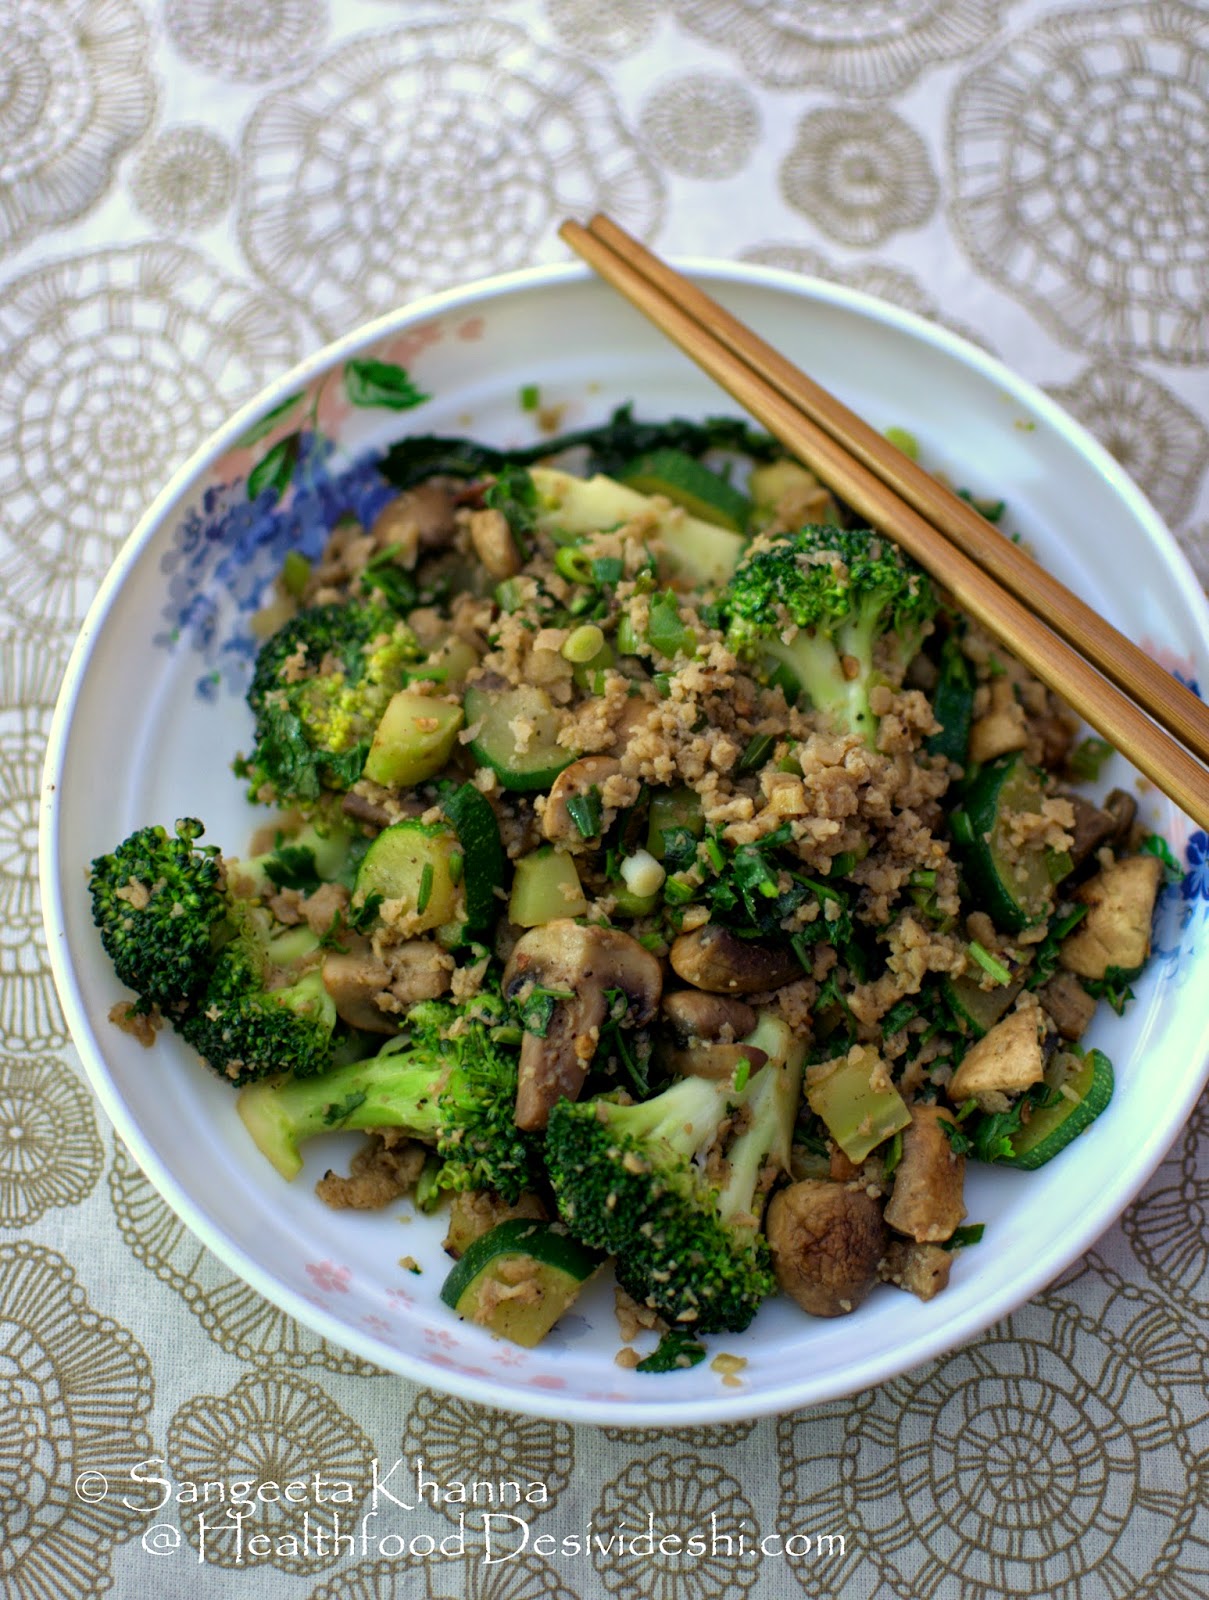 stir fried vegetables with chicken mince for a healthy meal